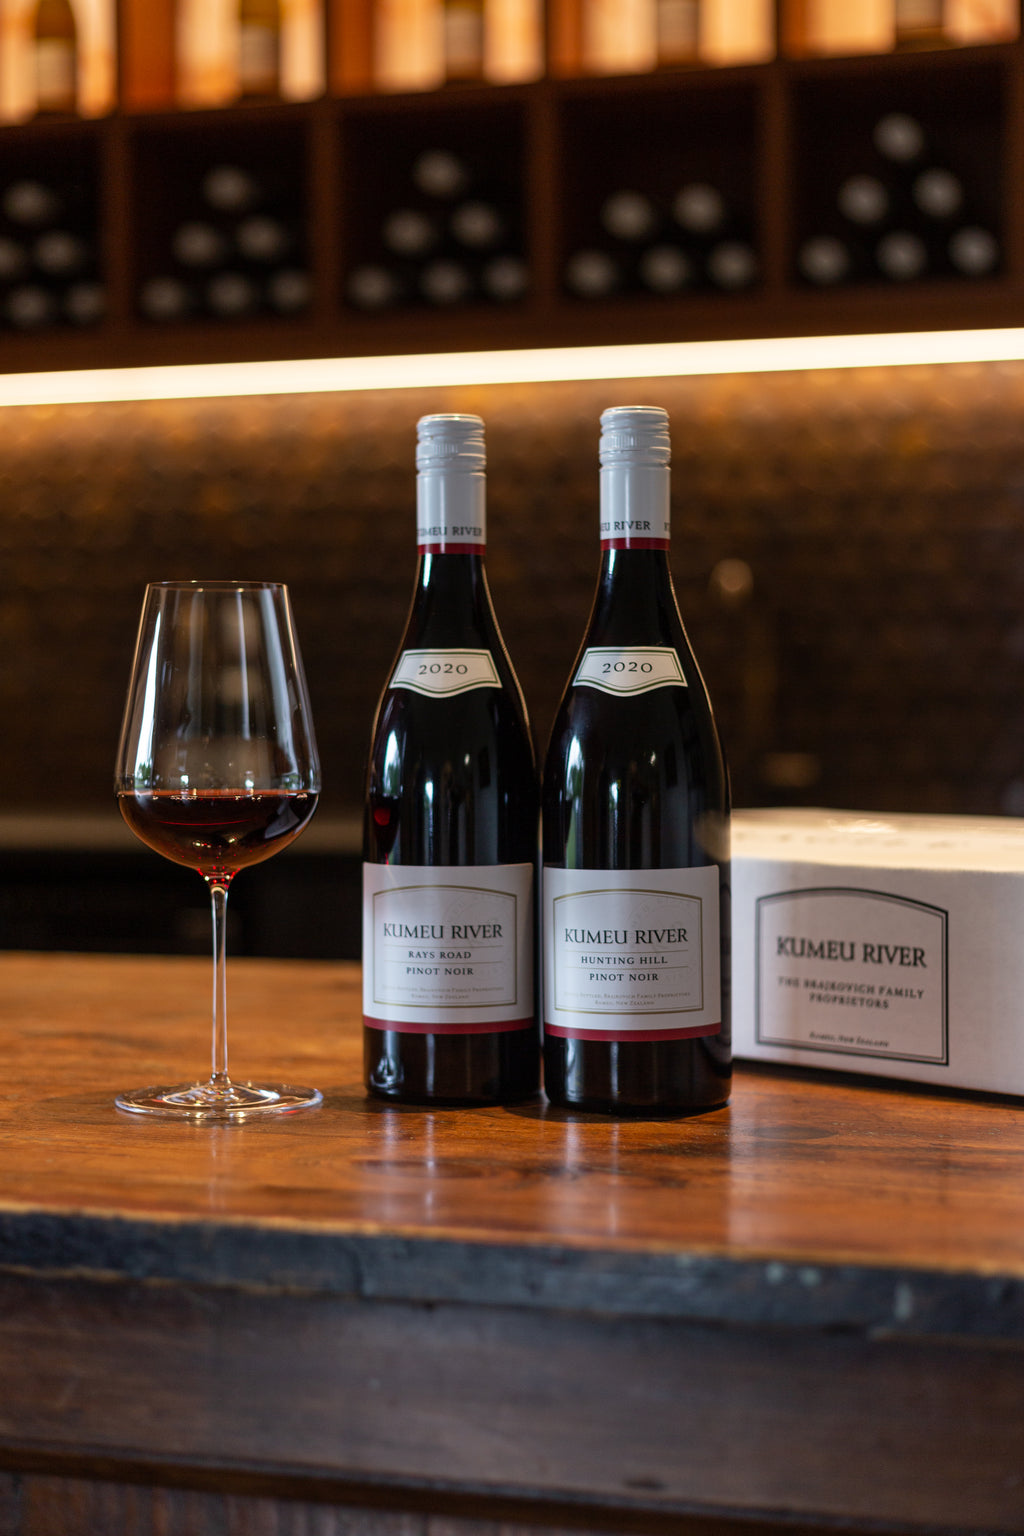 The distinct differences between Hunting Hill & Rays Road Pinot Noir